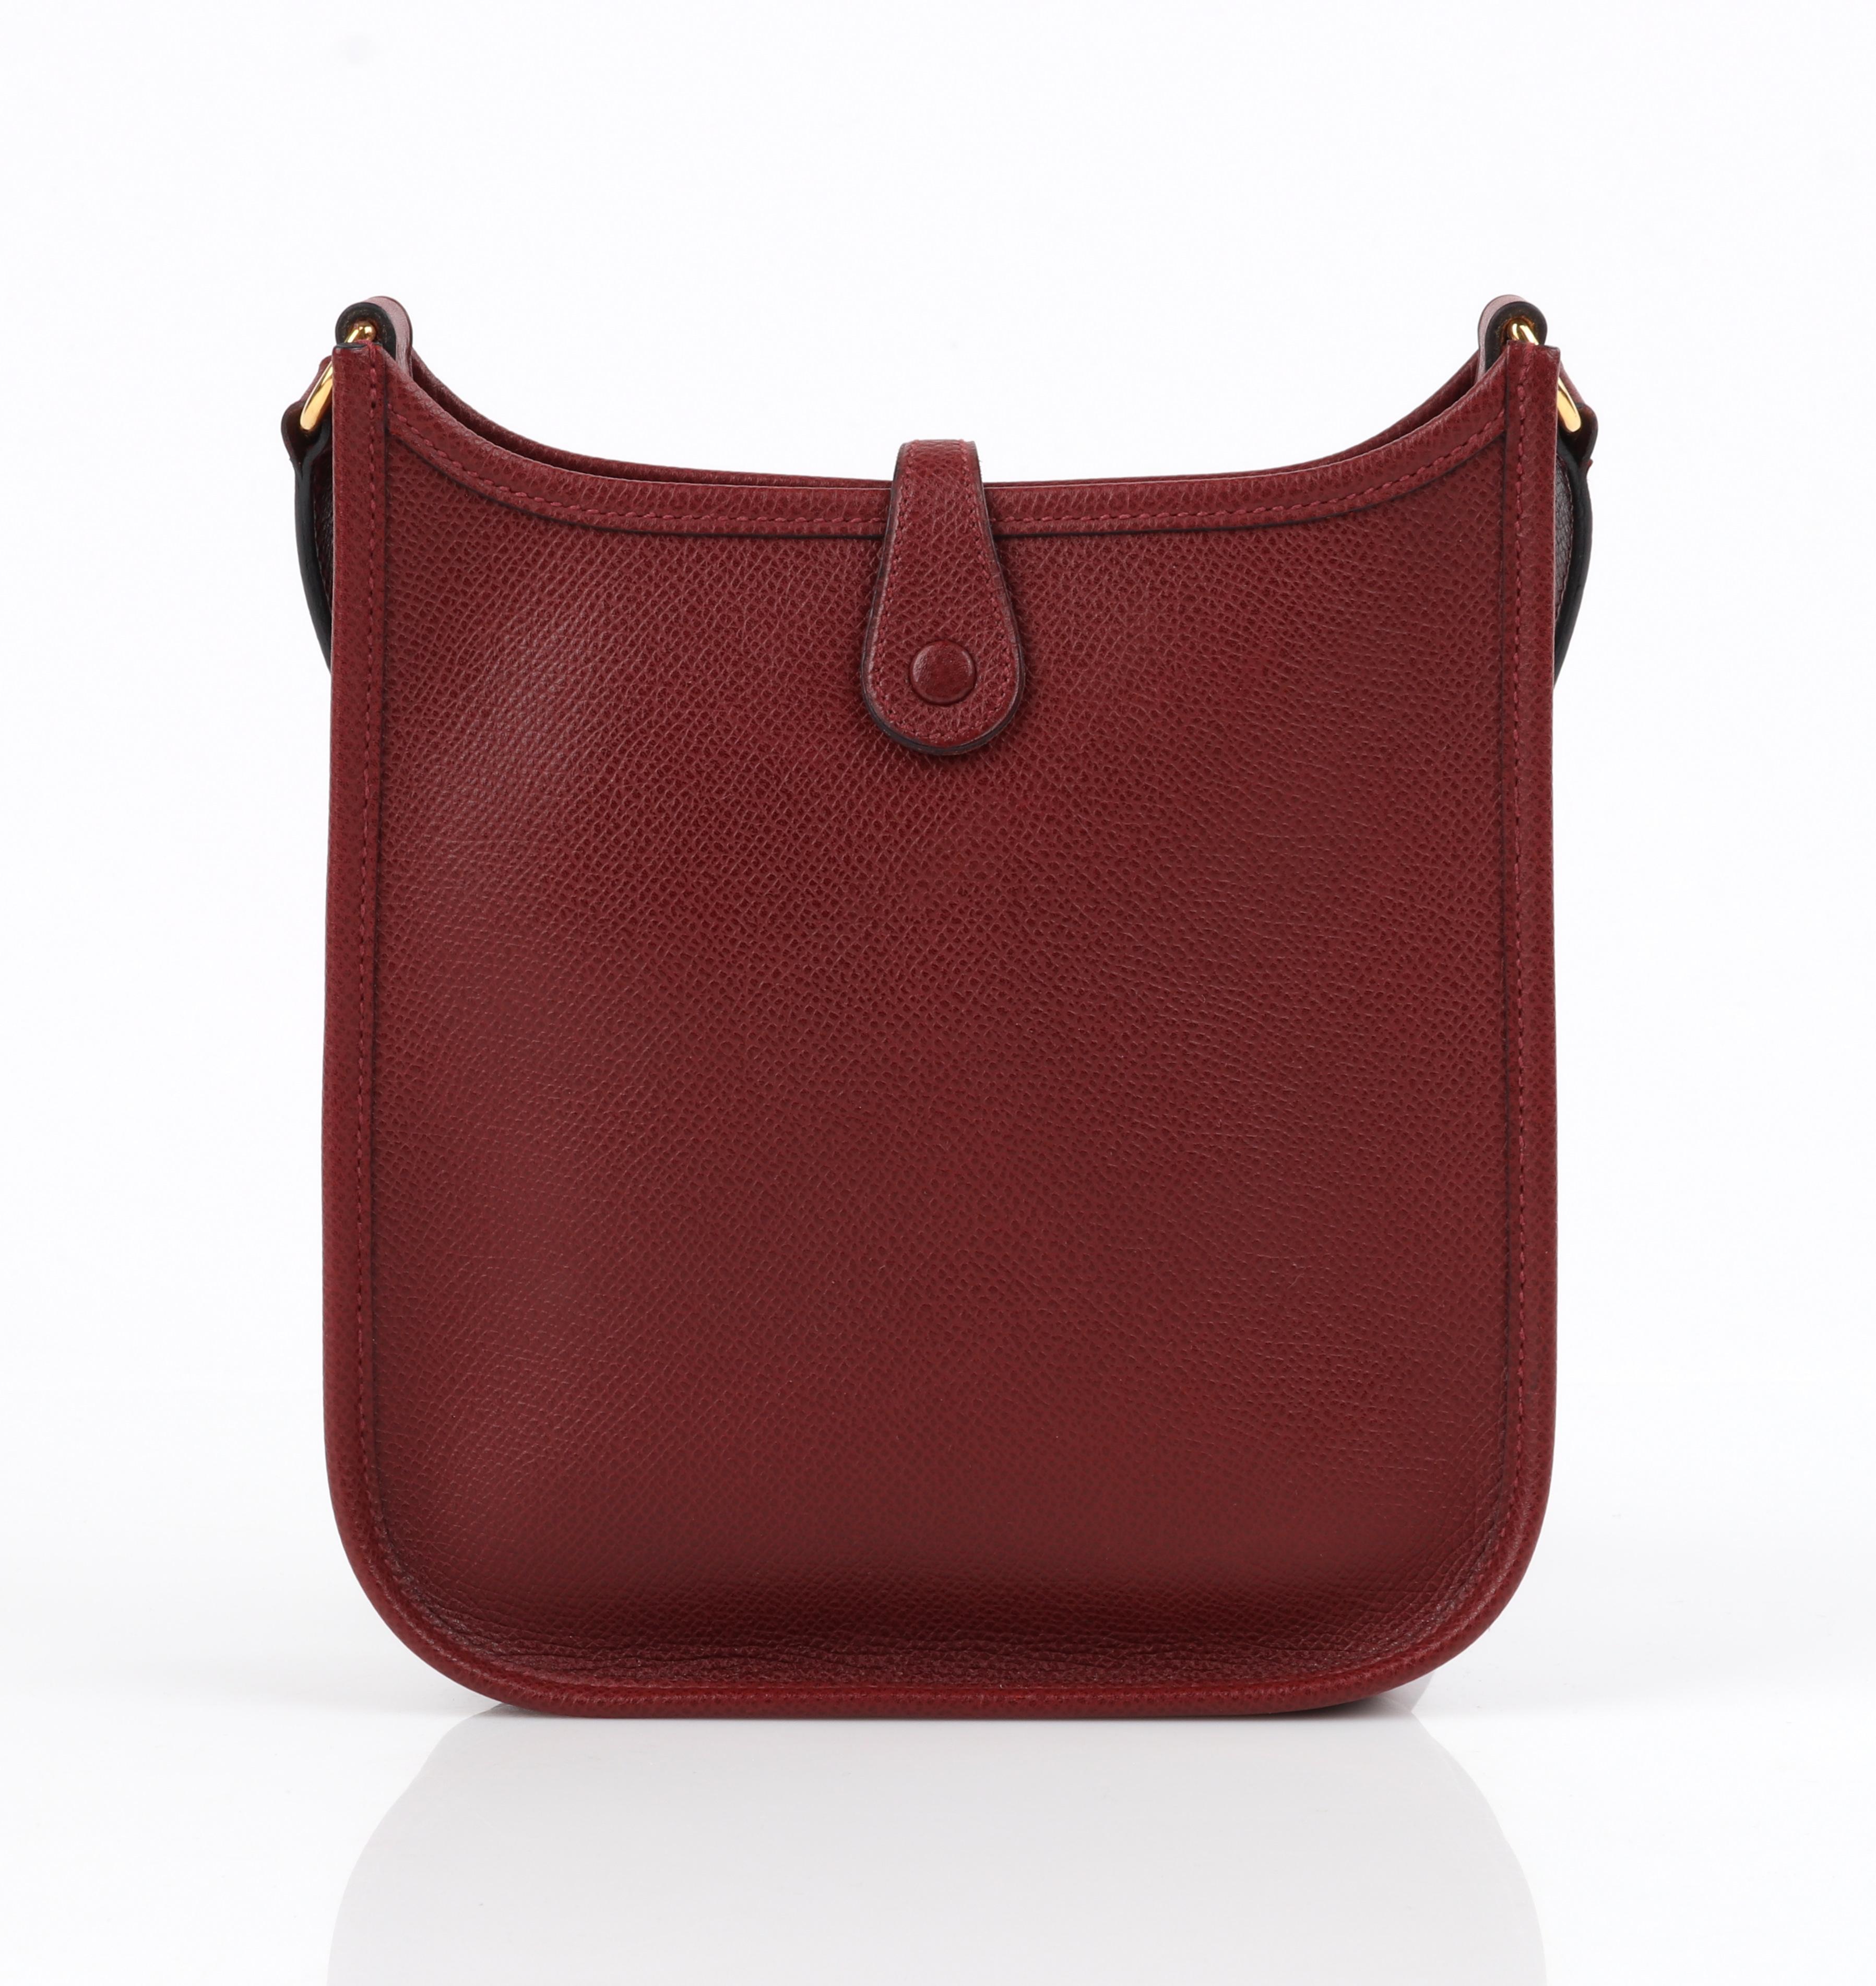 hermes bag with perforated h